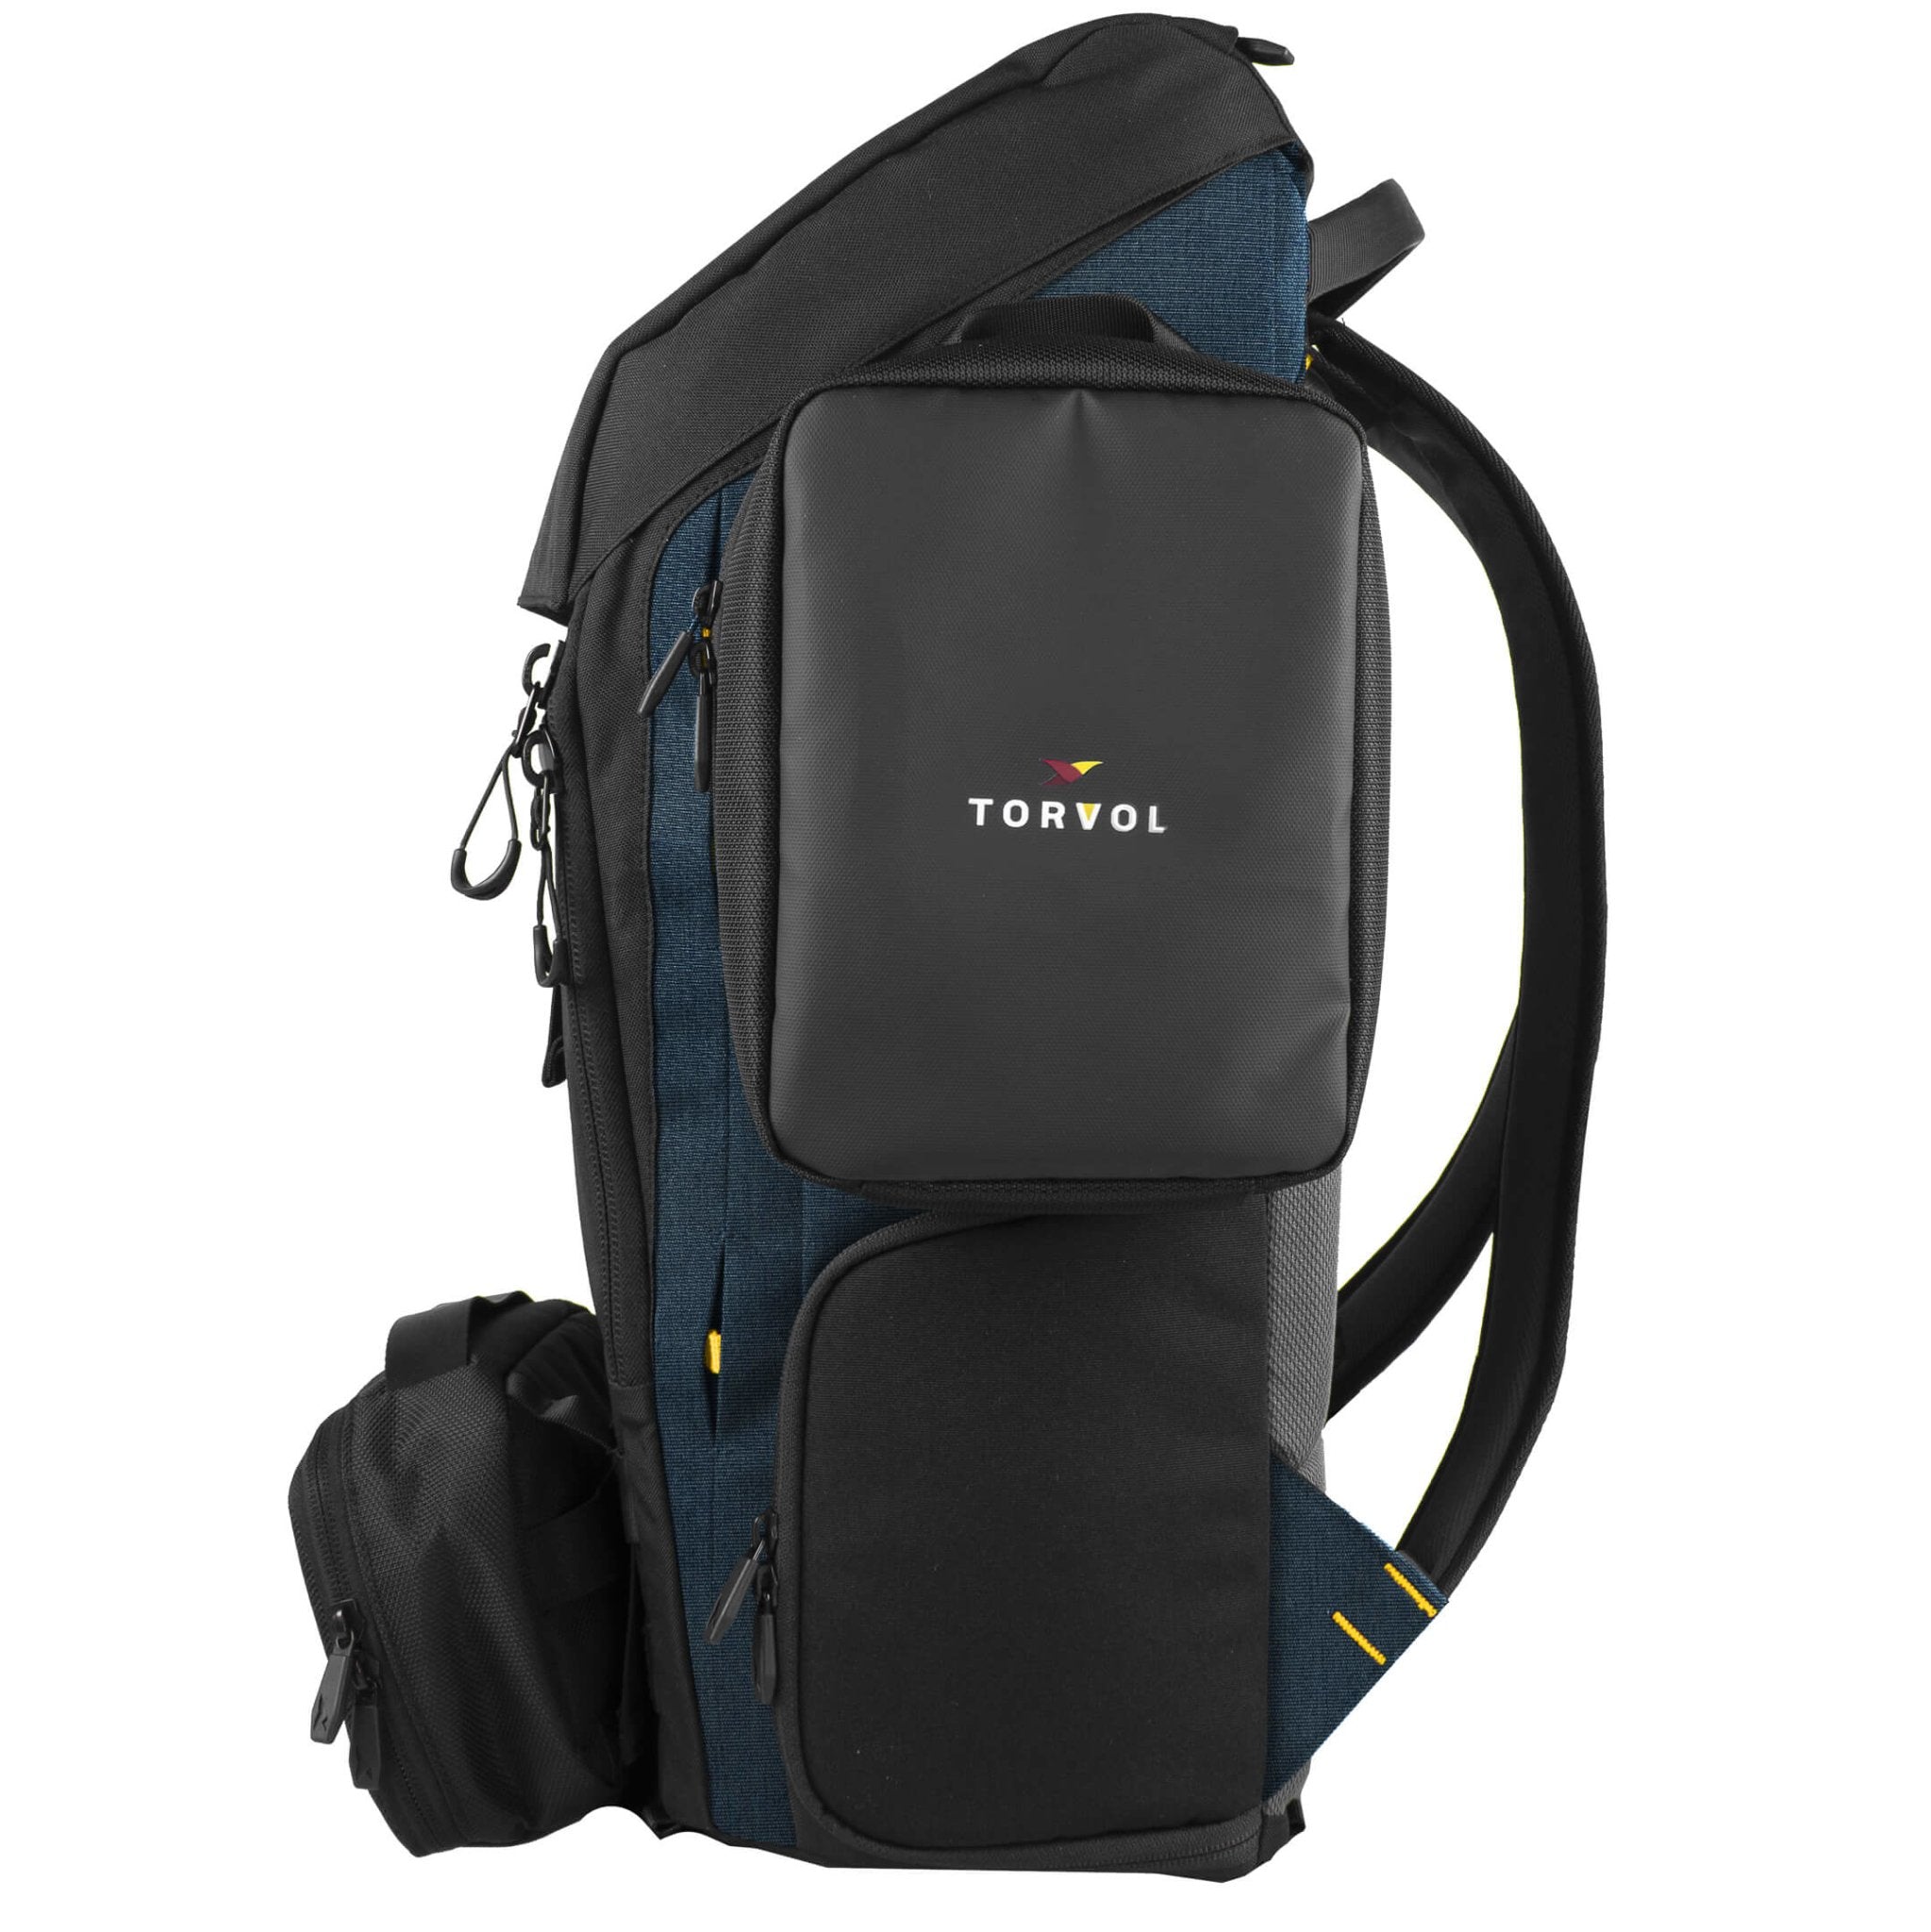 Torvol Urban Carrier Backpack - Your All-Round Freestyle Backpack 16 - Torvol - Drone Authority